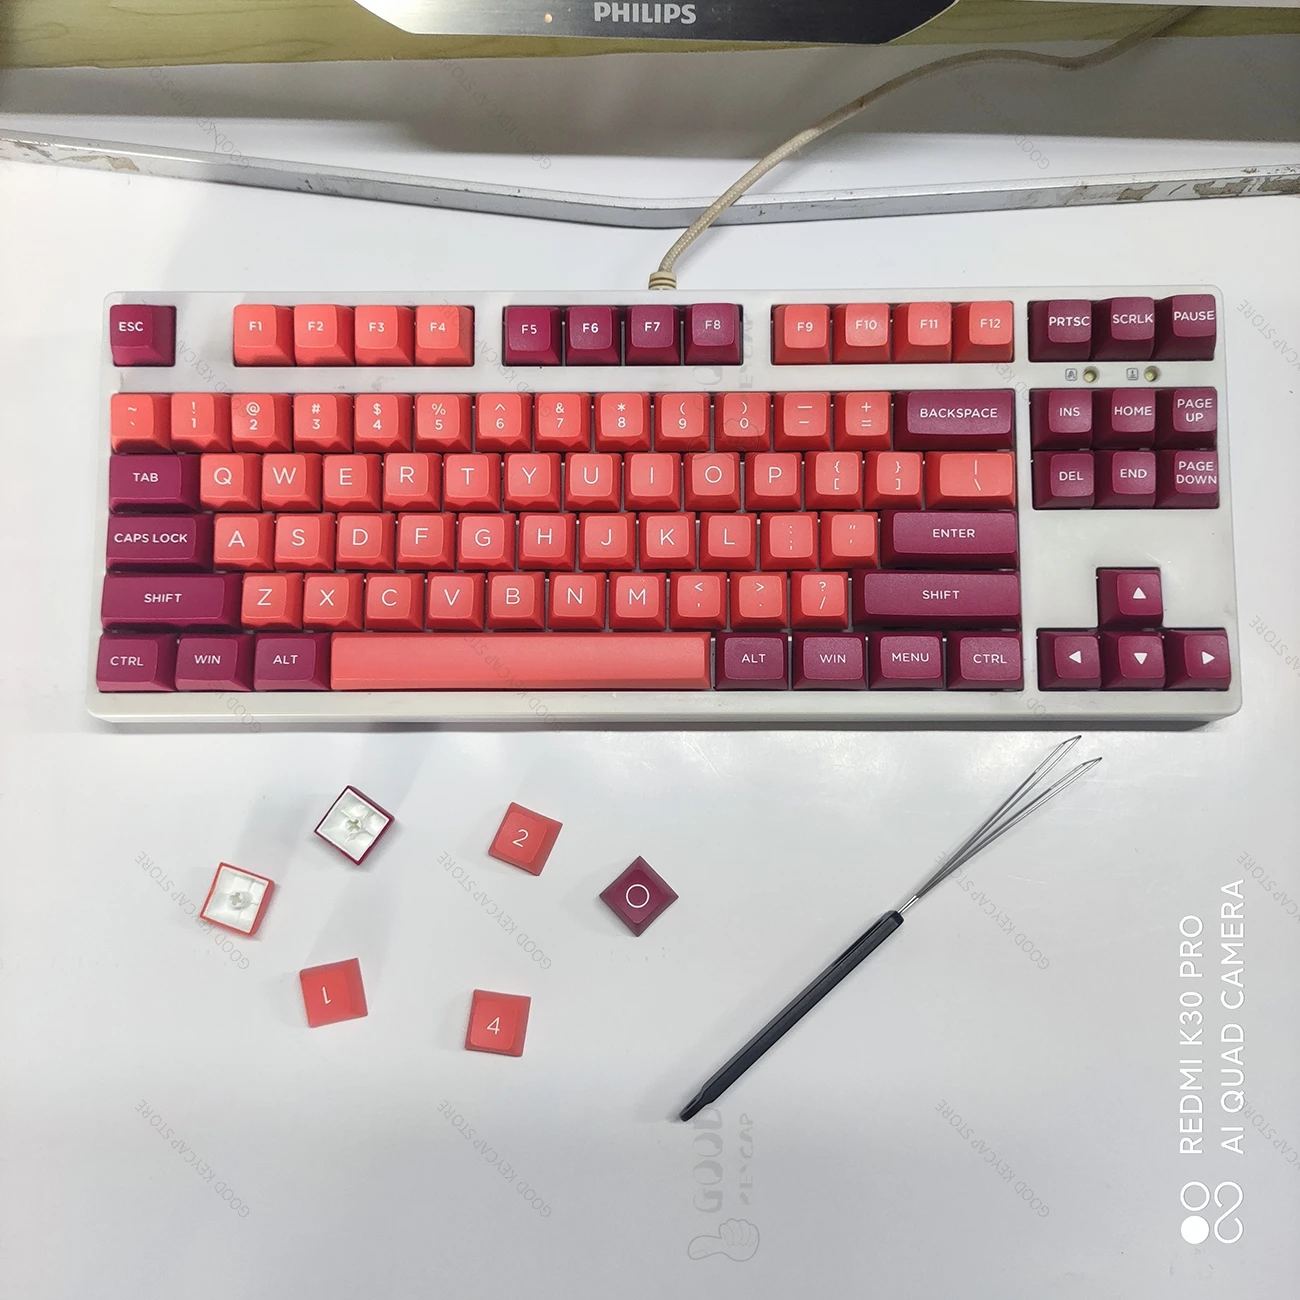 

WINMIX Keycaps 155 Key PBT Material OSA Height Lava Orange Caps For Mechanical Keyboard Two Color Injection Molding Process